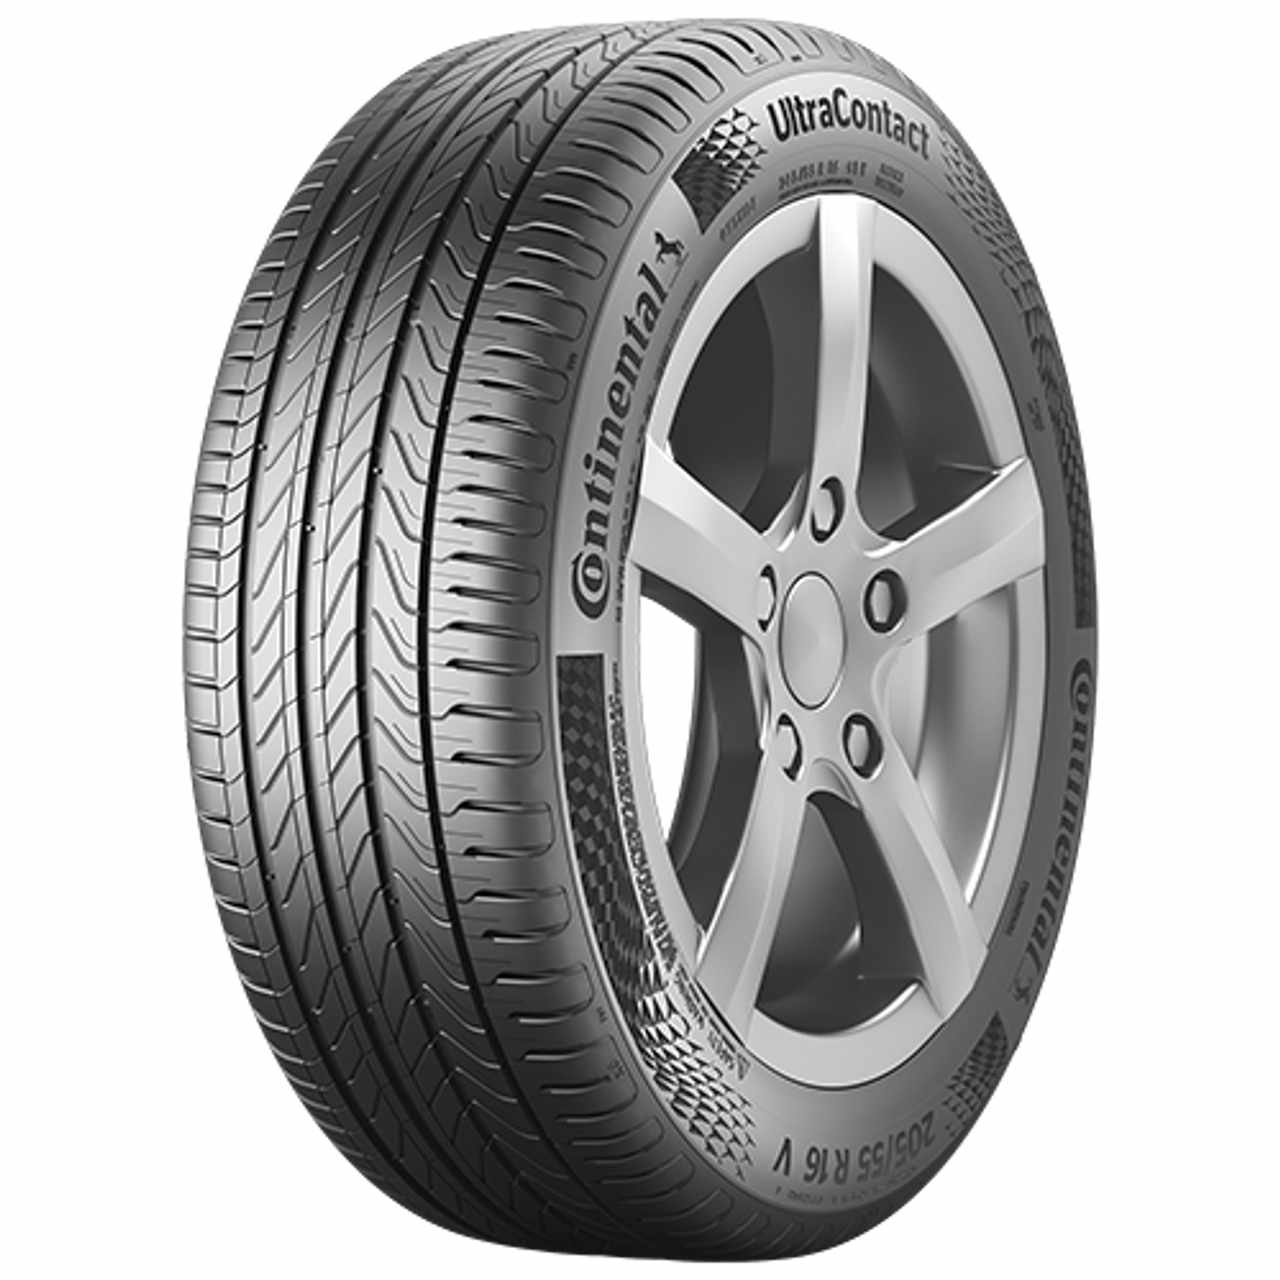 CONTINENTAL ULTRACONTACT (EVc) 185/50R16 81H FR BSW